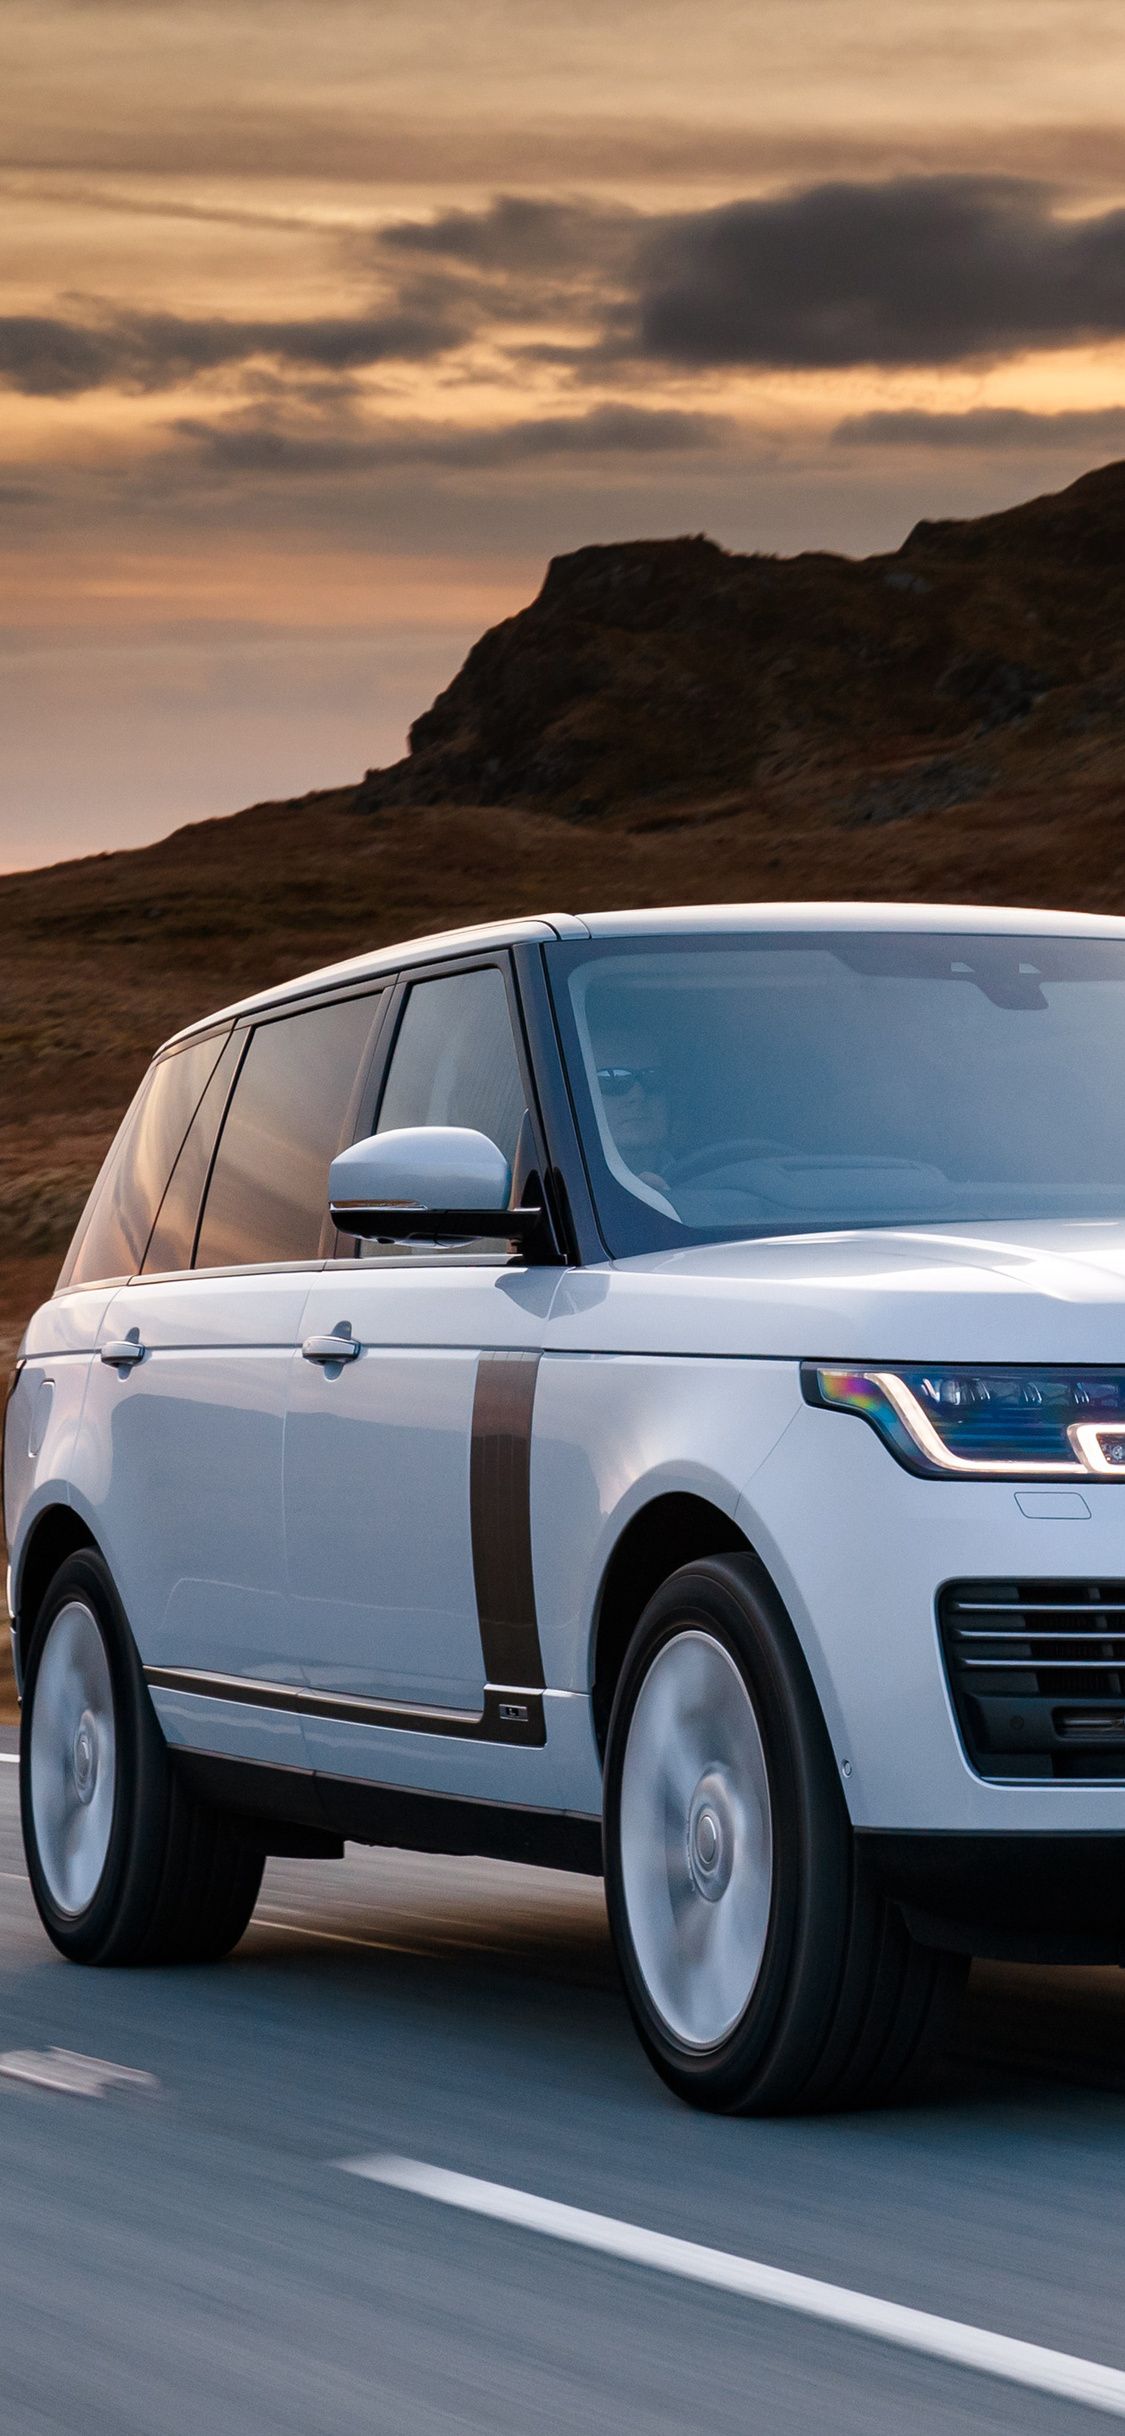 Range Rover Autobiography P400e LWB 2018 iPhone XS, iPhone iPhone X HD 4k Wallpaper, Image, Background, Photo and Picture